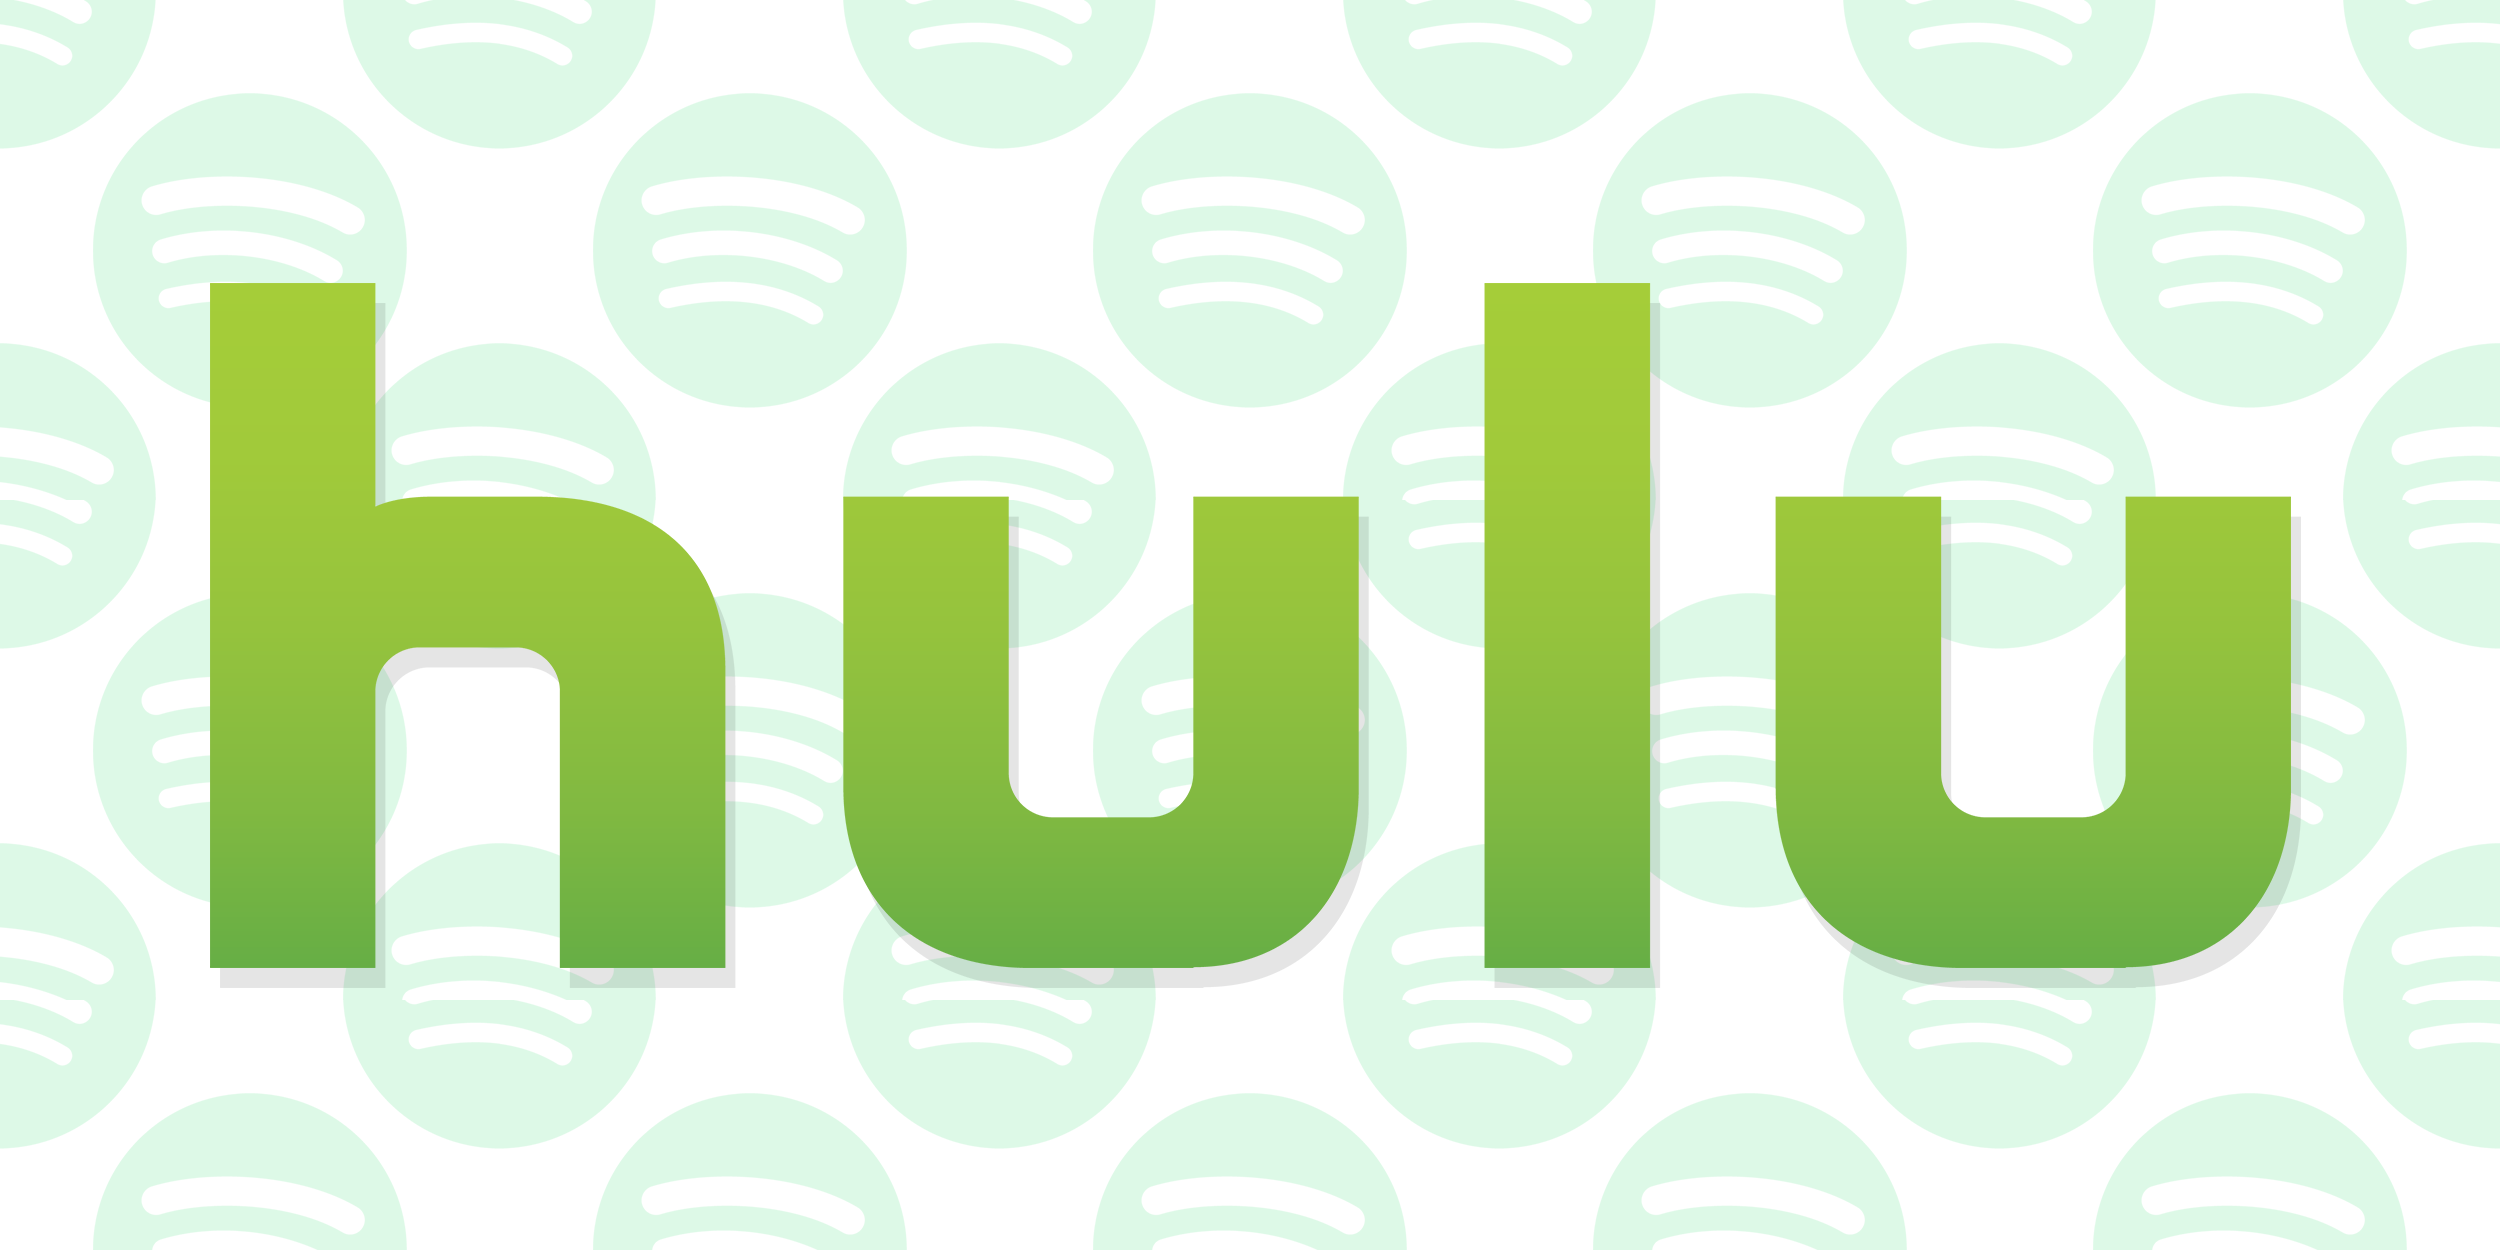 how much does spotify premium cost monthly